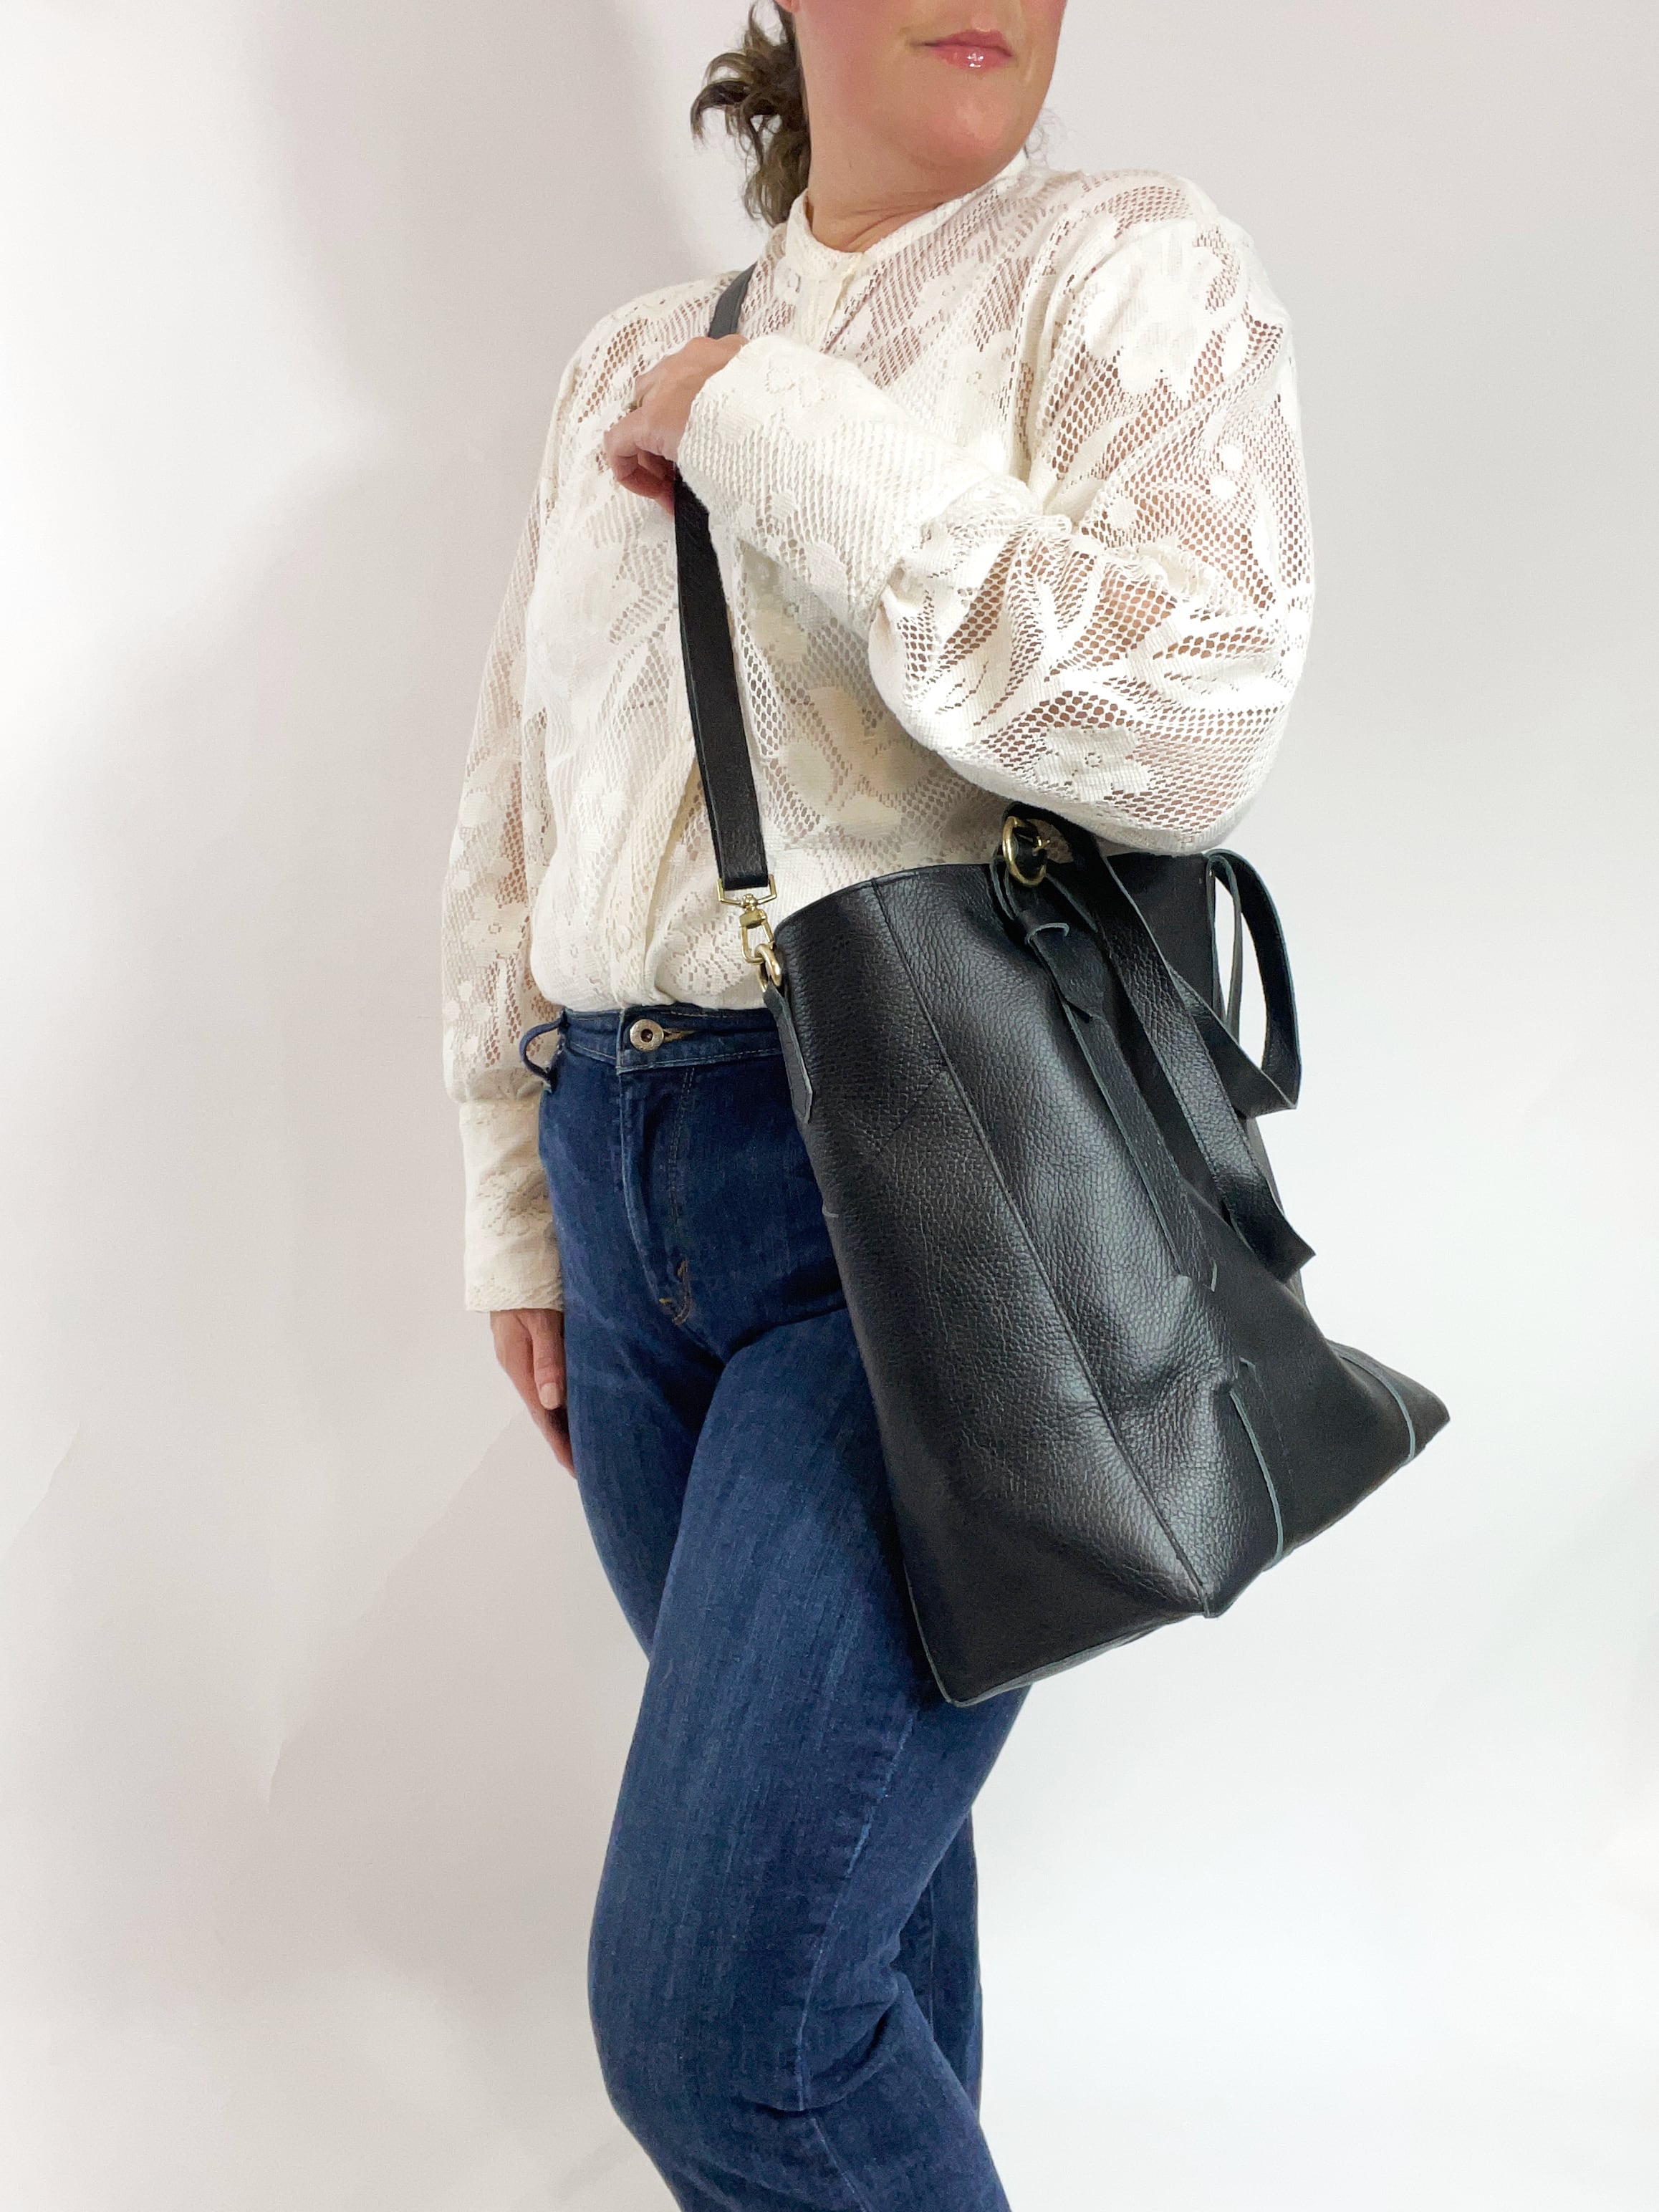 Everyday Tote Bag in Pebbled Black Leather (PREORDER)